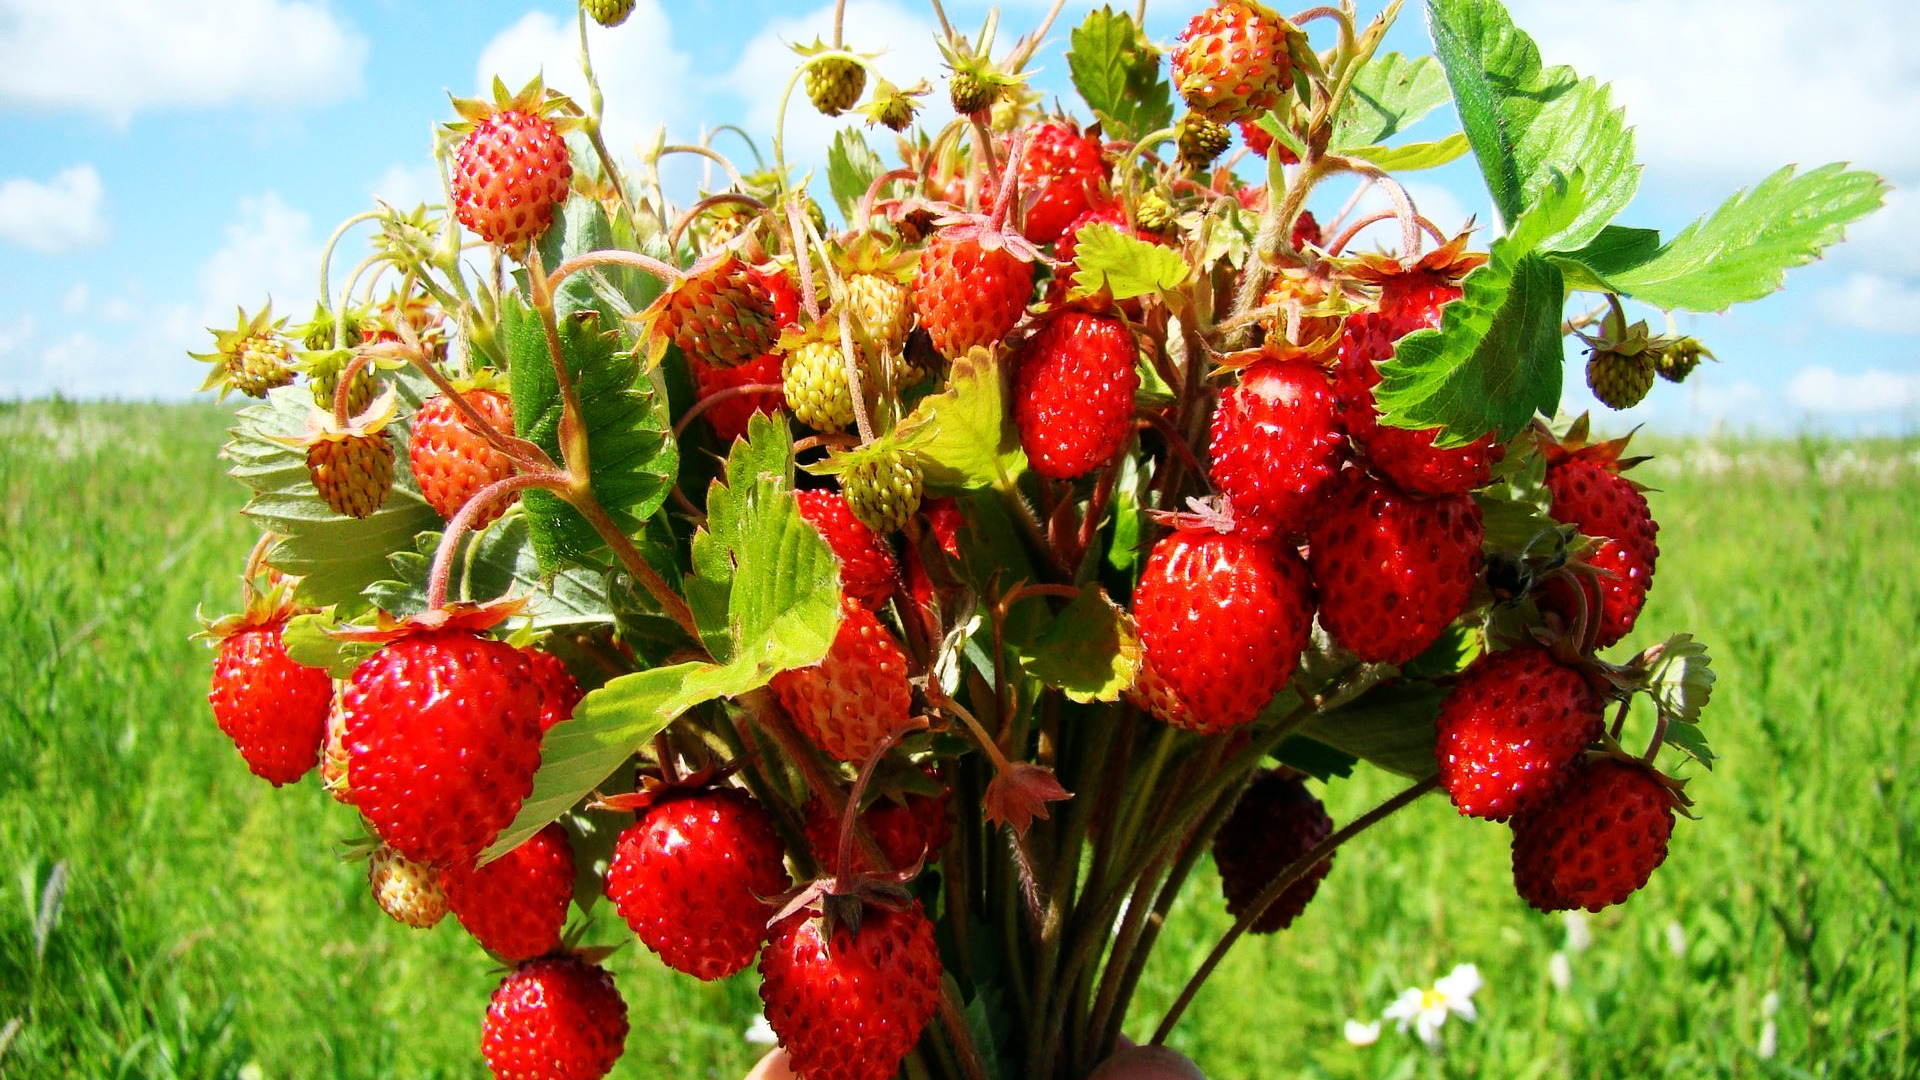 Bouquet of wild strawberries for 1920 x 1080 HDTV 1080p resolution